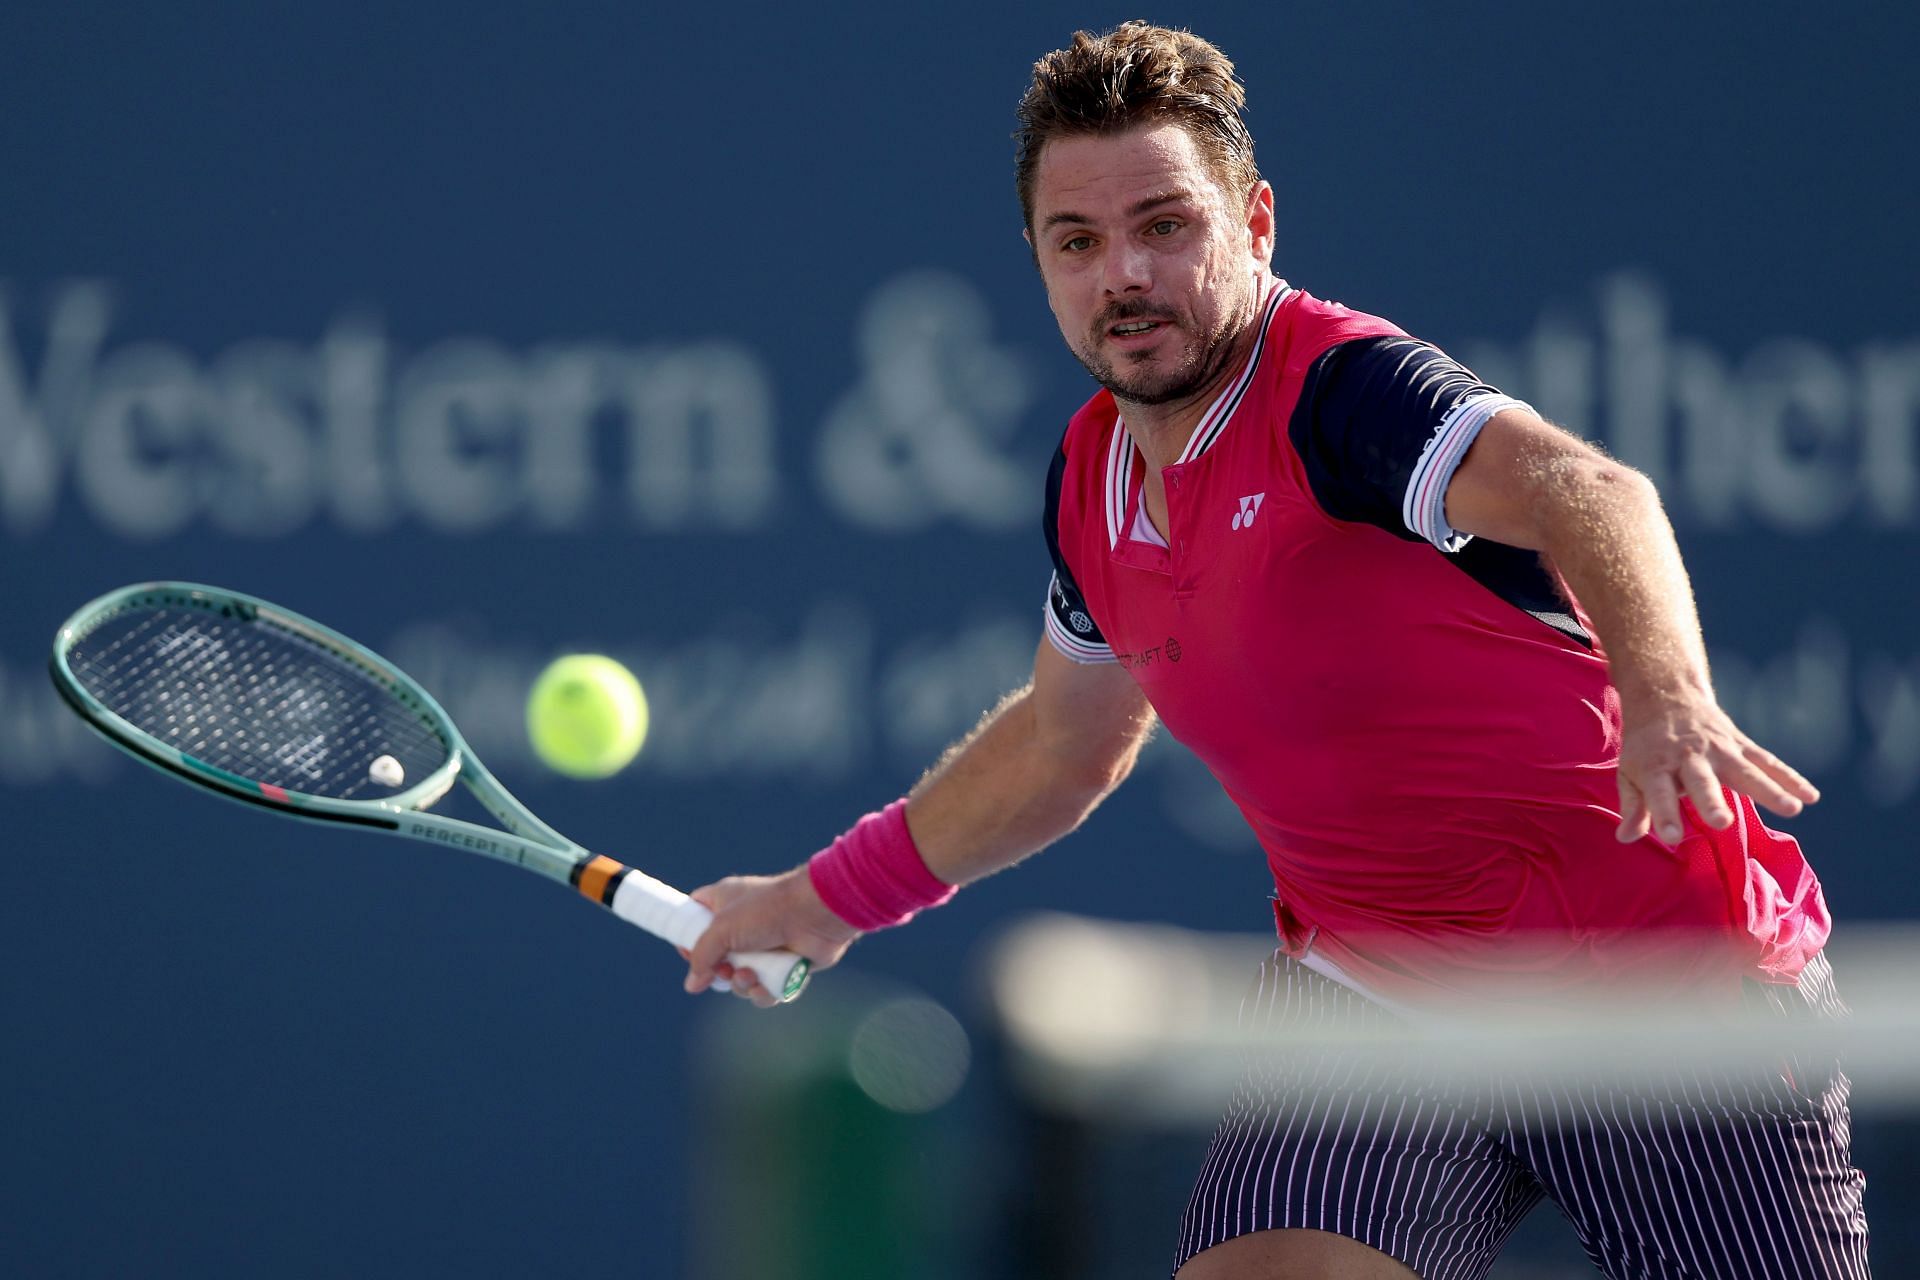 Wawrinka is into the second round.